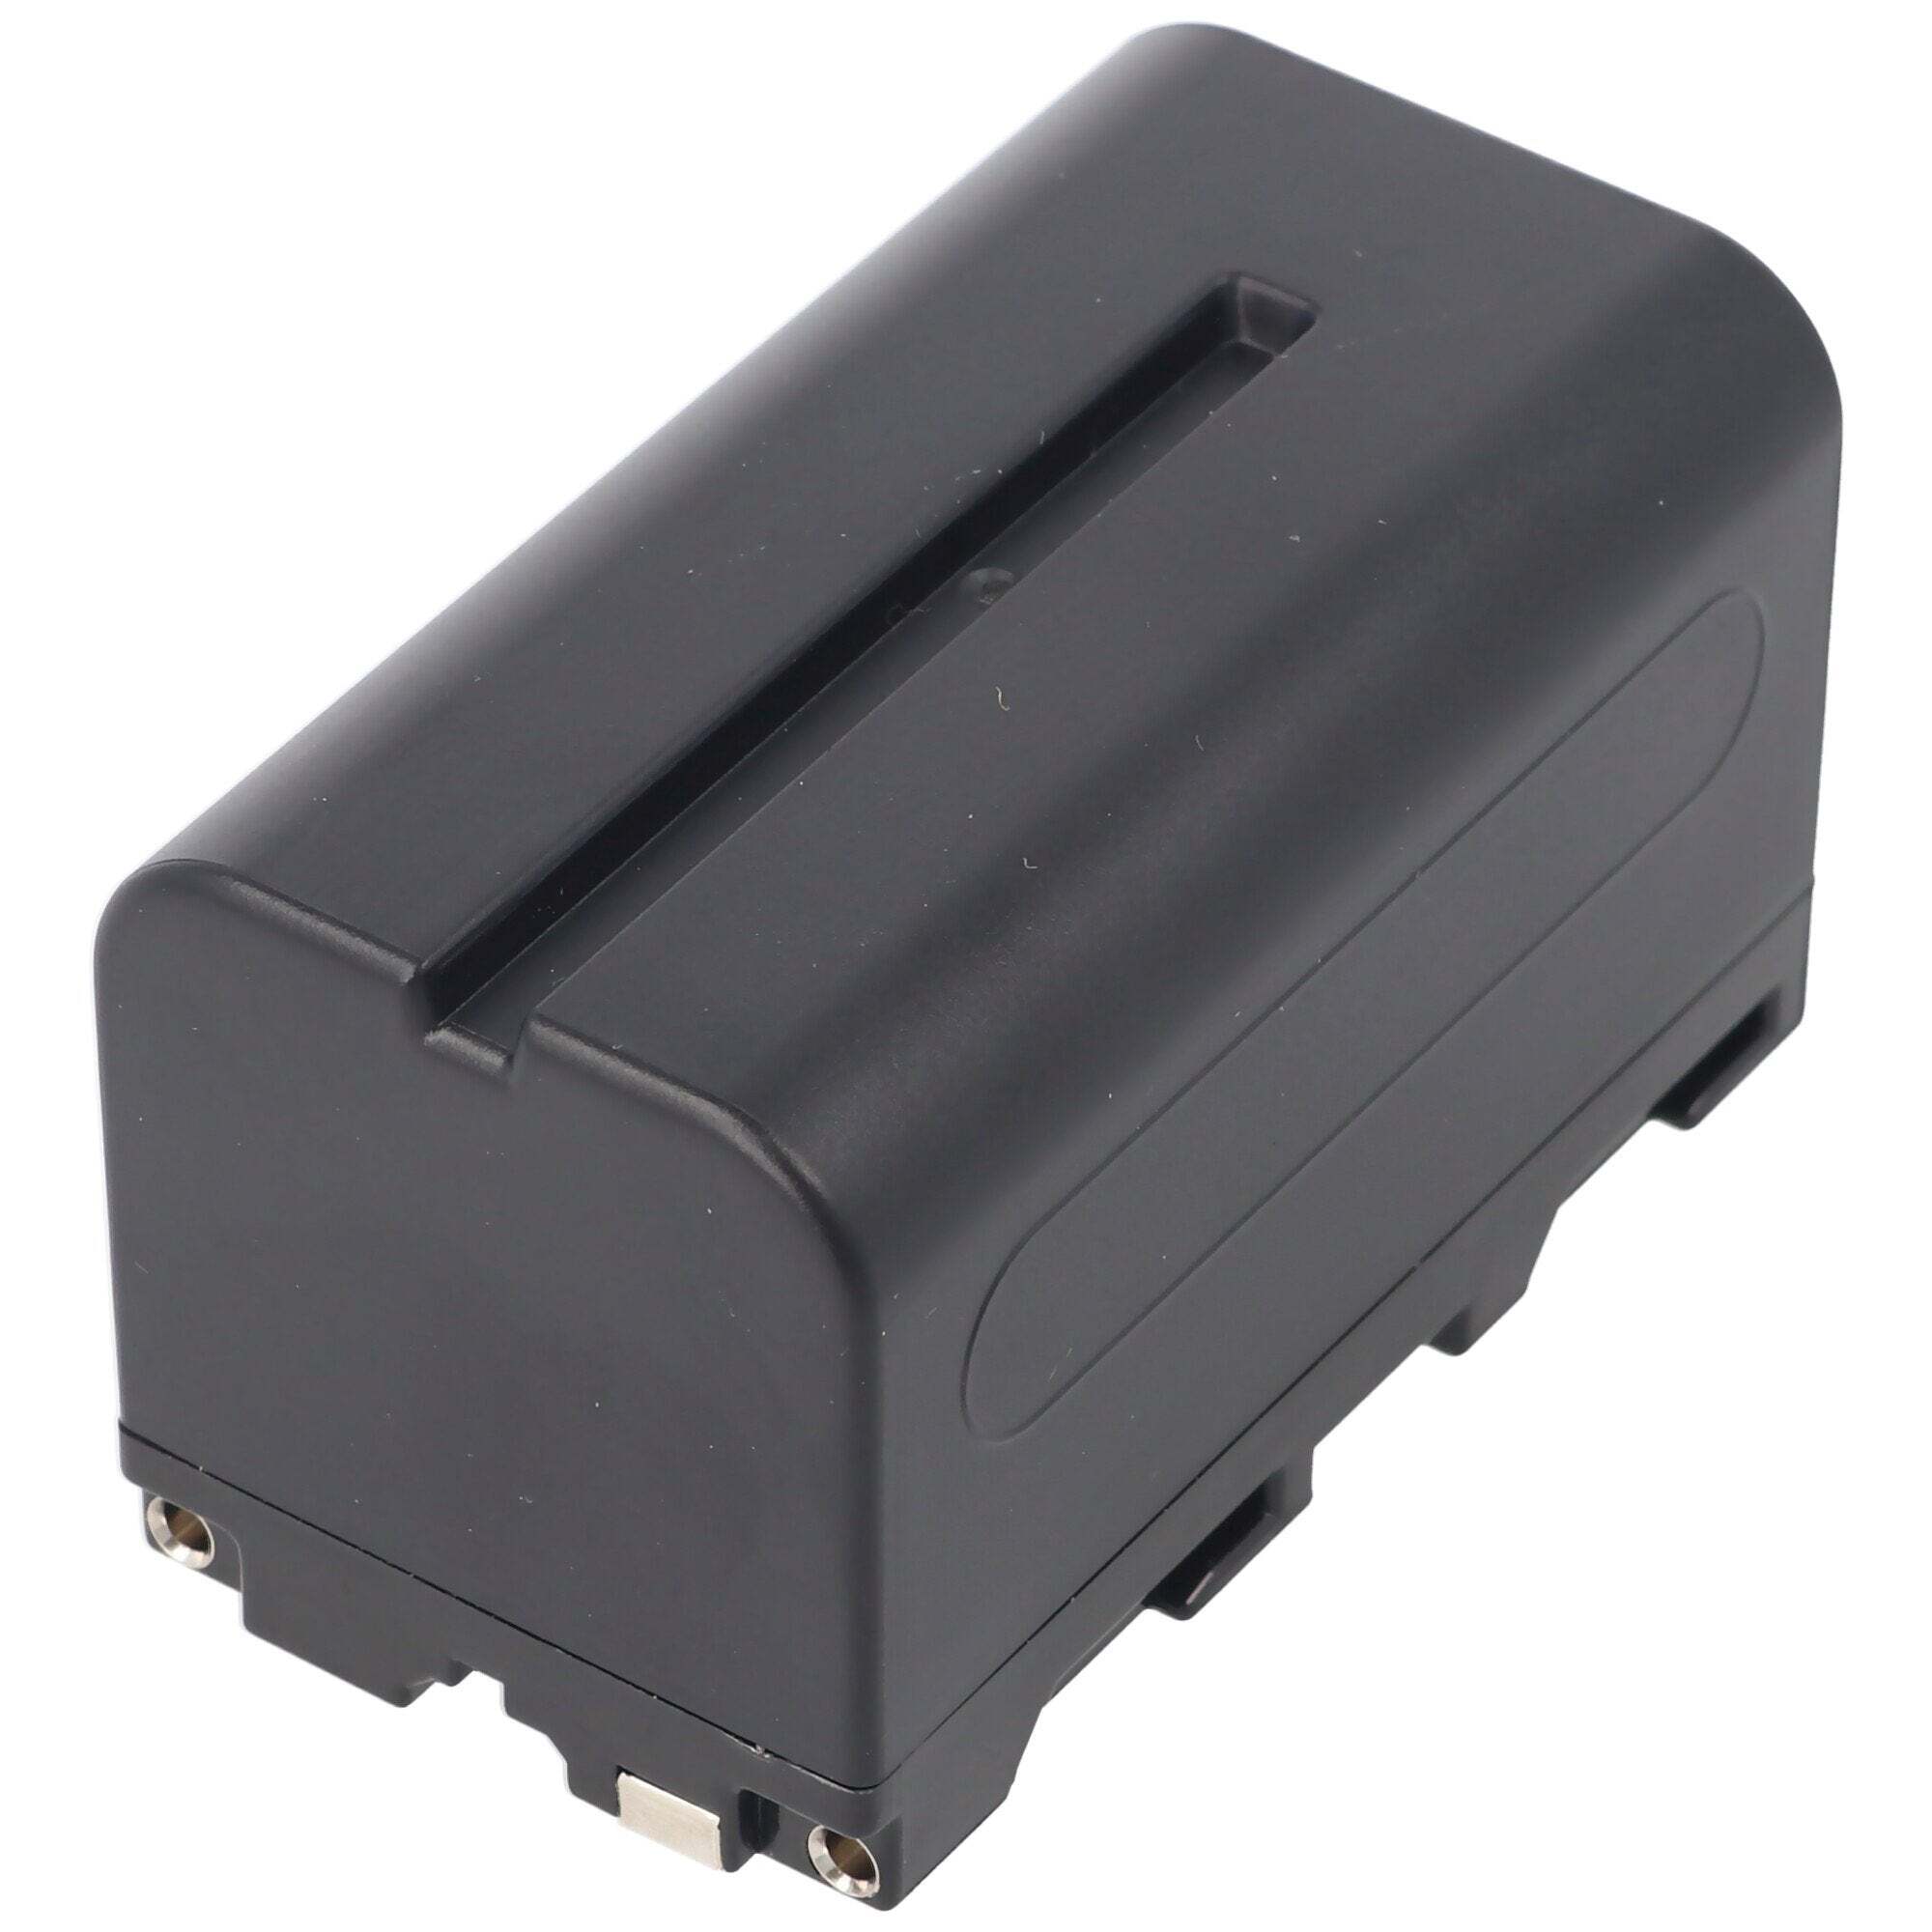 ACCUCELL AccuCell-batterij geschikt voor Sony NP-F750, NP-F770